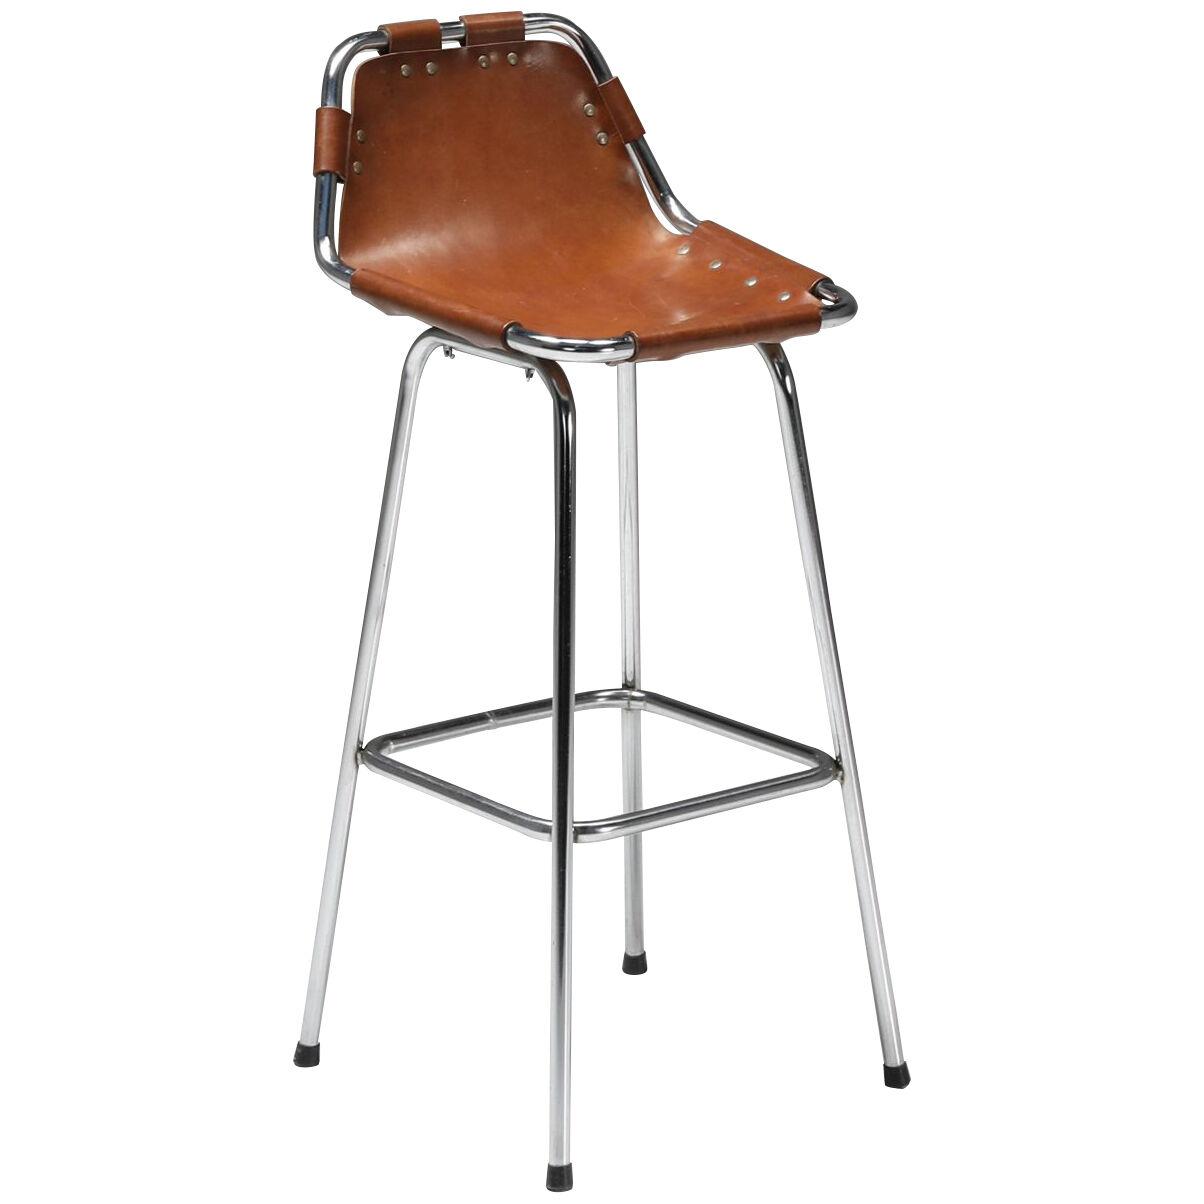 High Bar Stool by Charlotte Perriand for the Les Arcs Ski Resort - 1960's